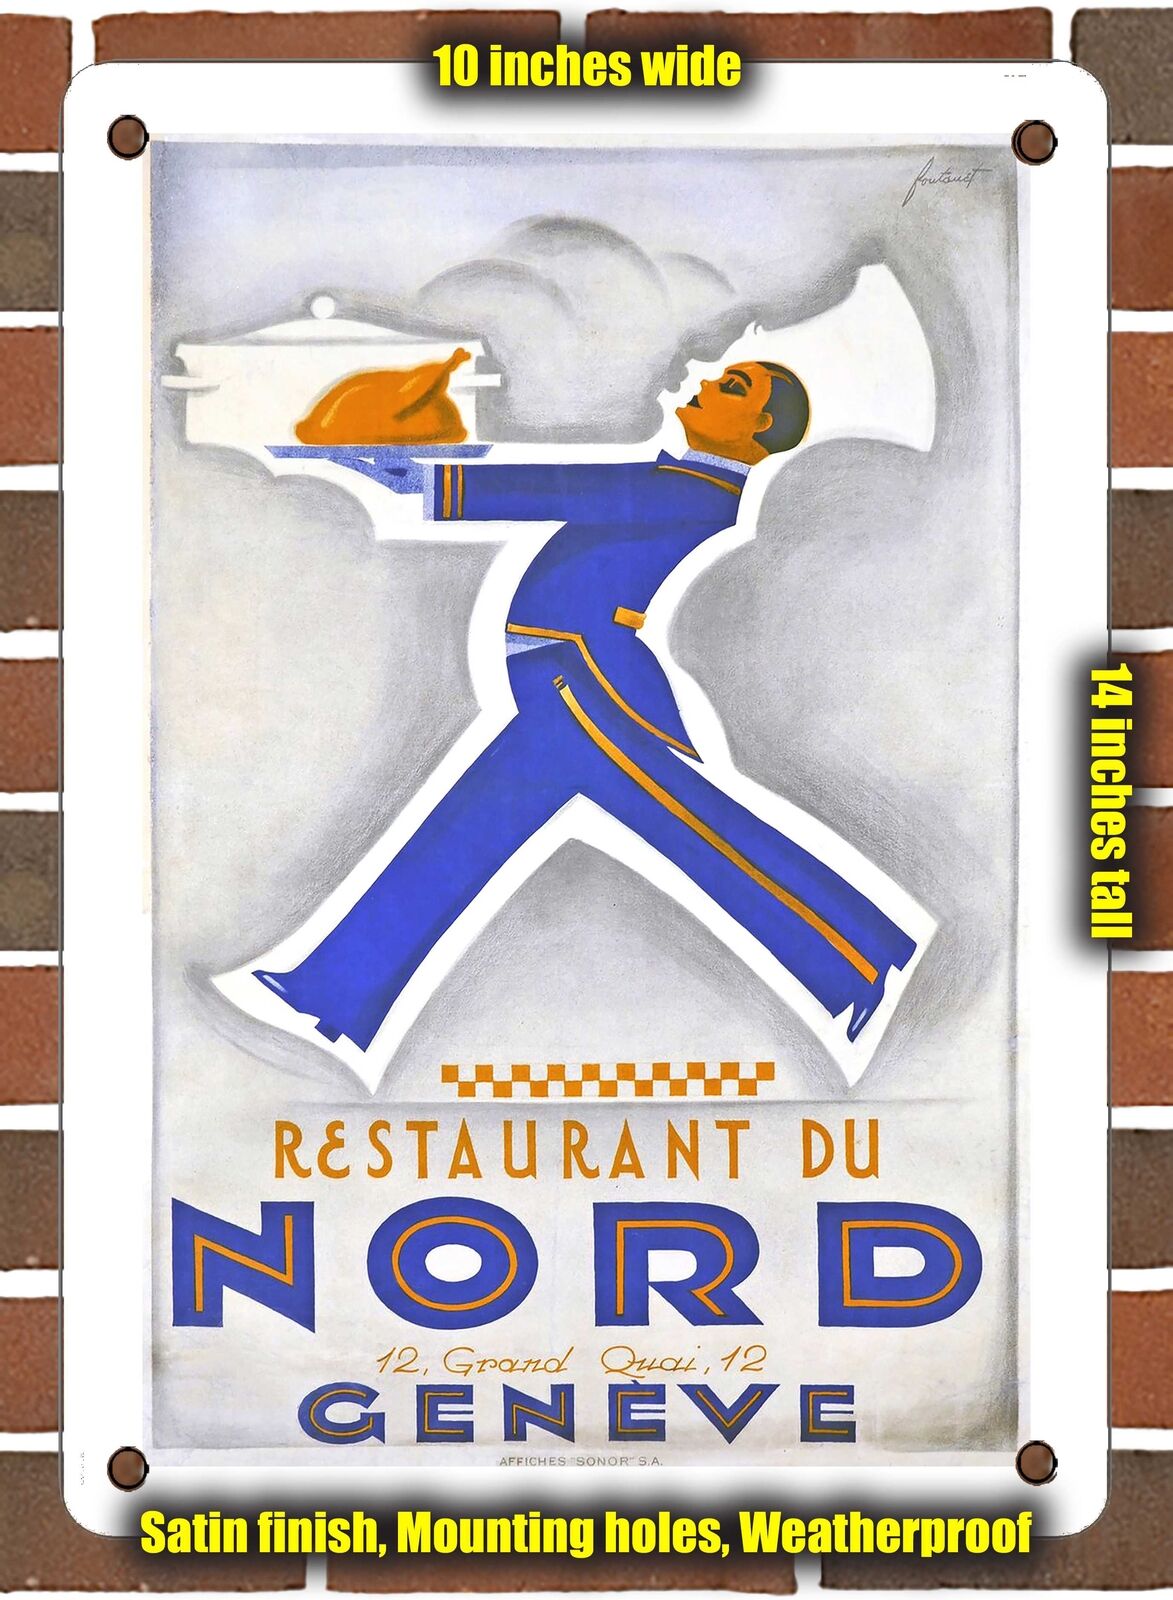 METAL SIGN - 1927 Restaurant of the North Geneva - 10x14 Inches